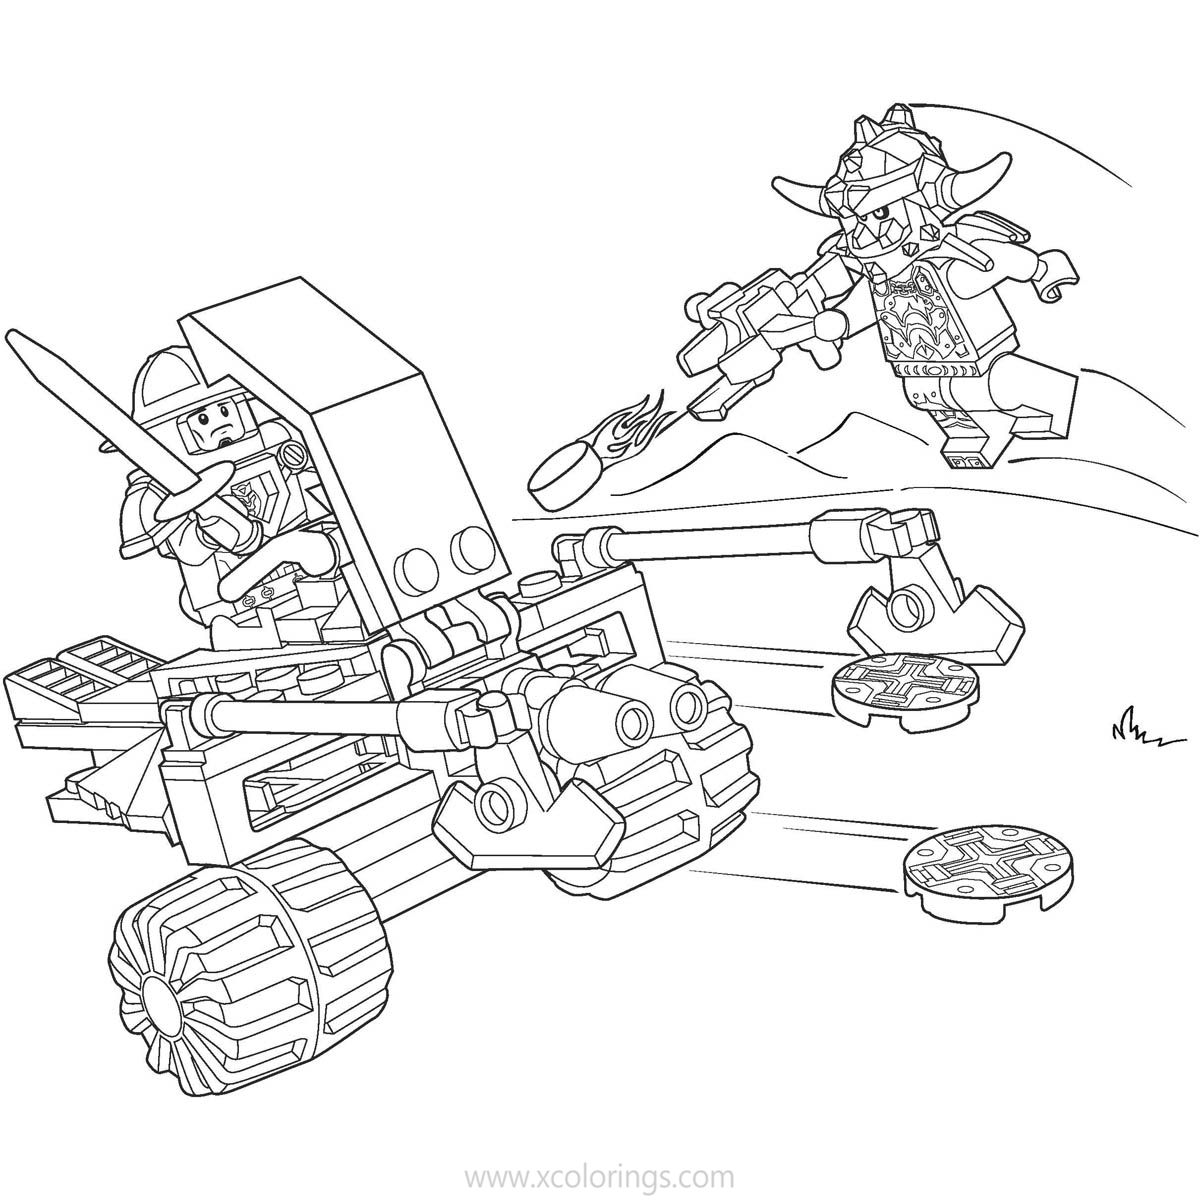 Free LEGO NEXO Knights Coloring Pages Free to Print printable